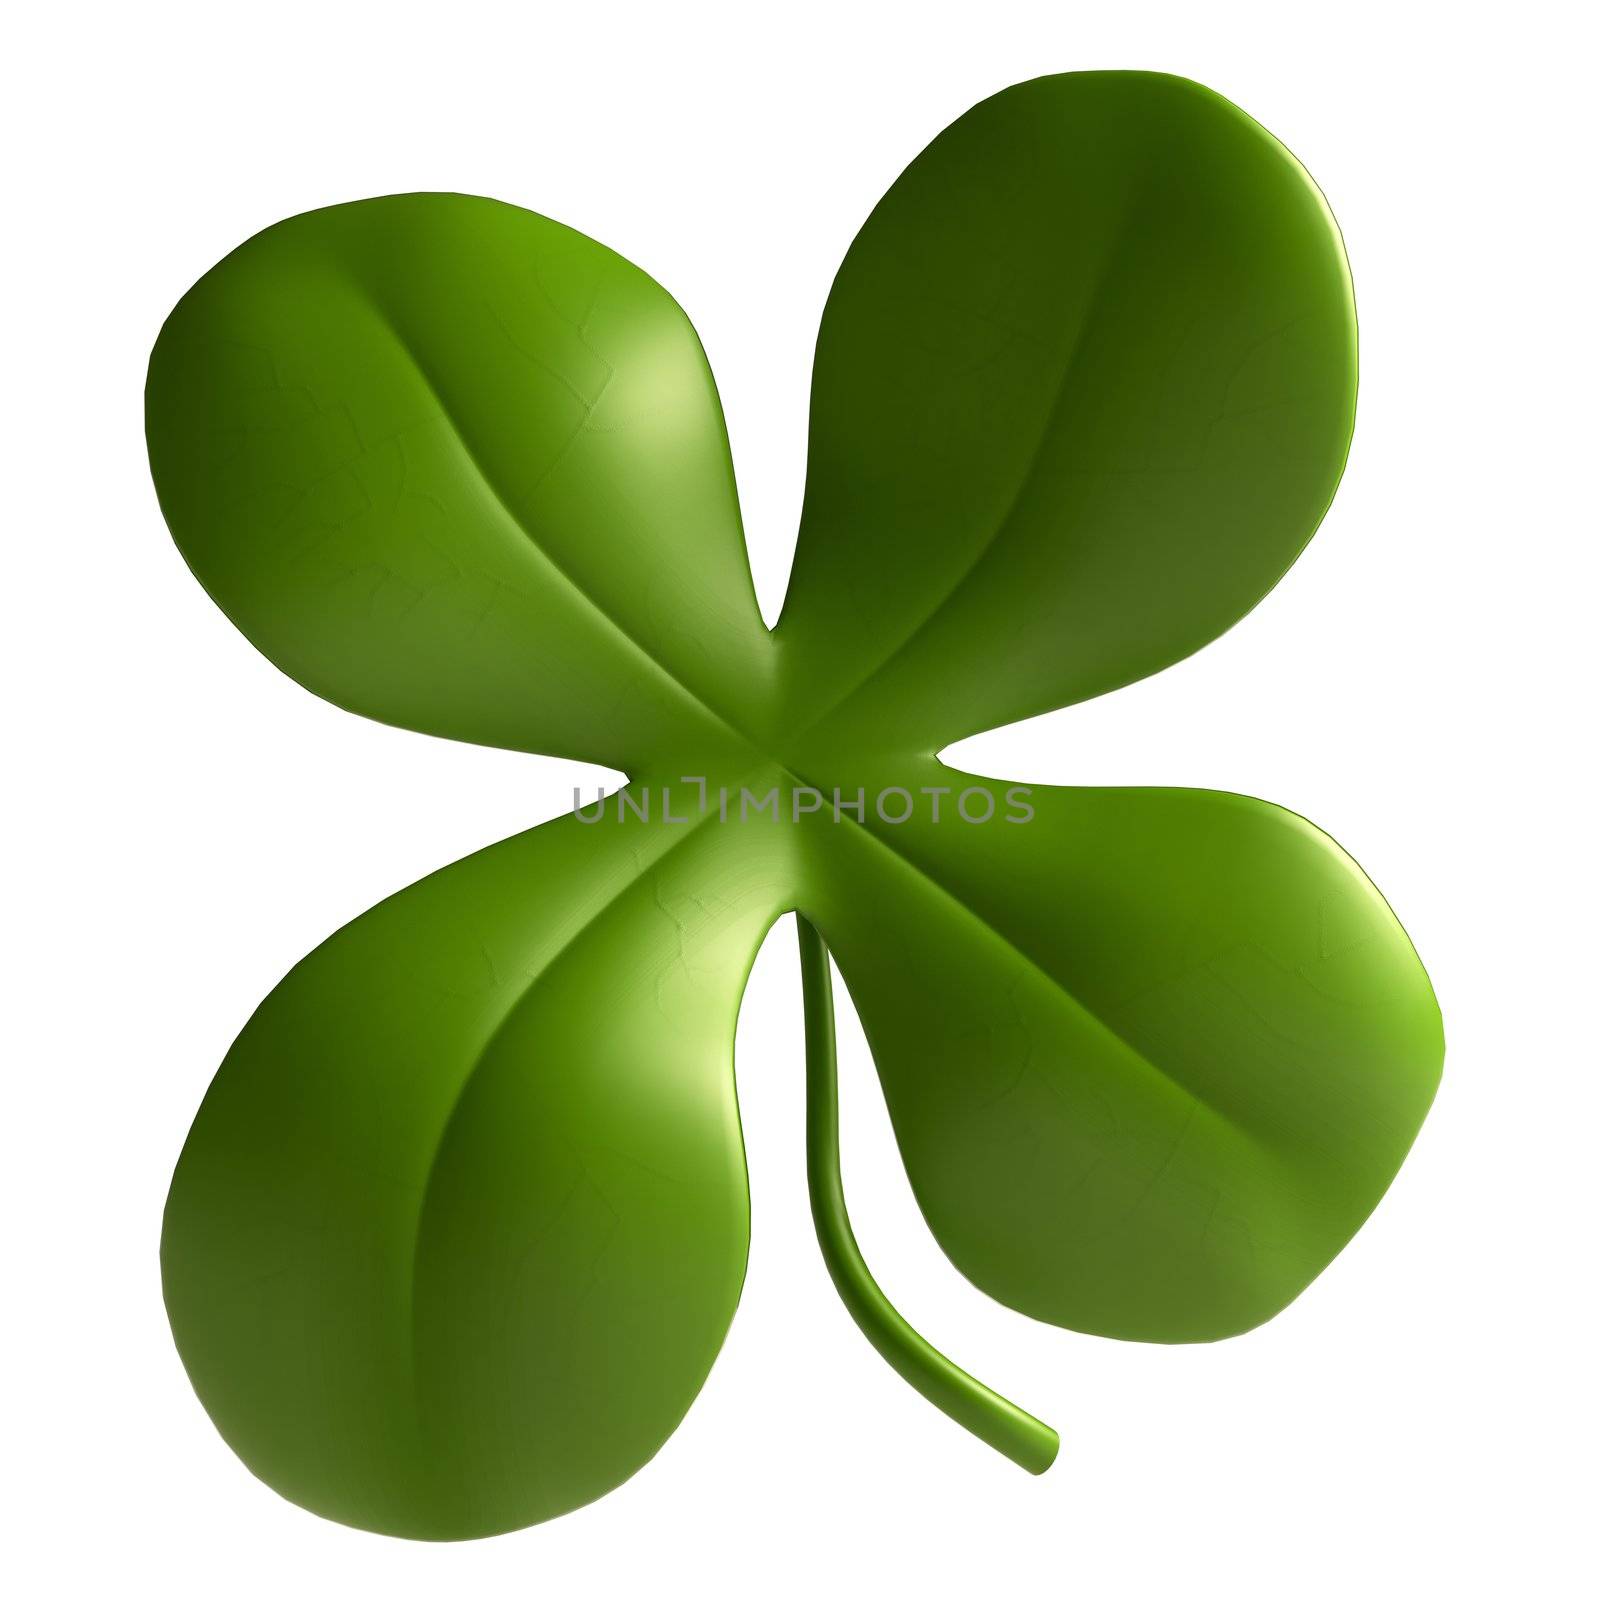 A lucky charm can be a clover, a pig or a rider as a chimney sweep